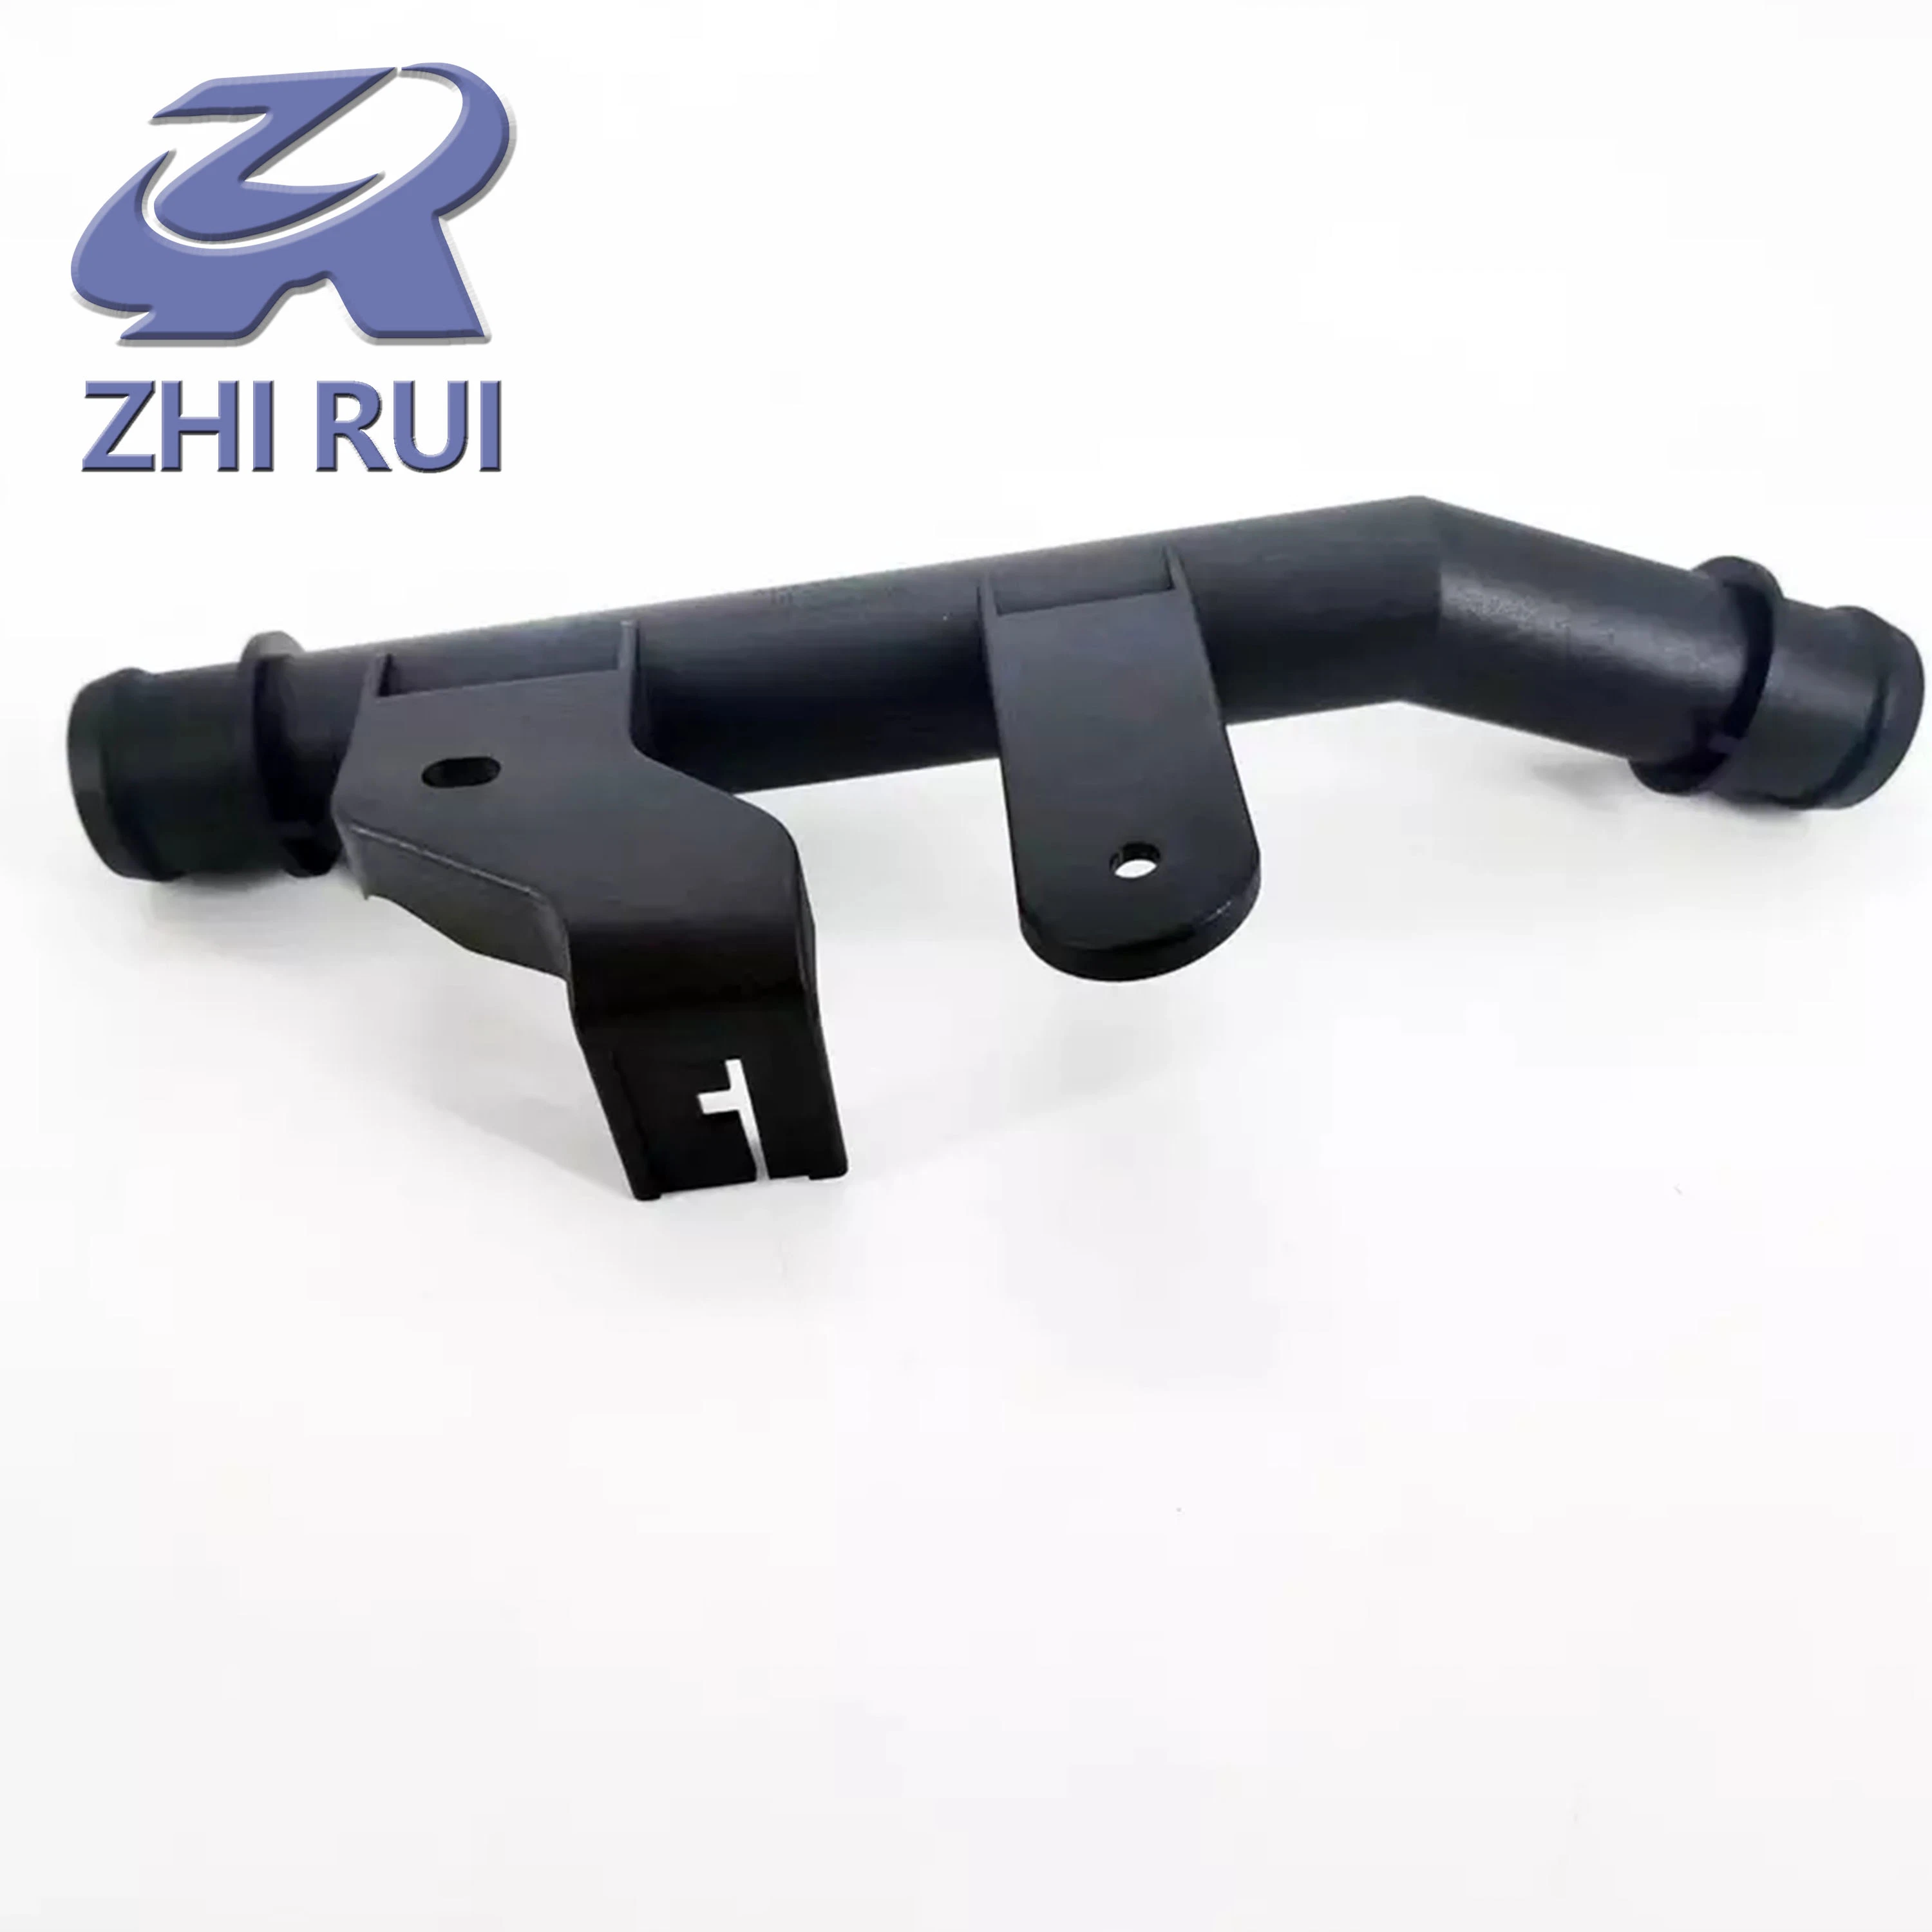 Auto Engine Radiator Coolant Hose Structure Cooling System Water Pipe for Auto Parts Xf 2.0t Xf 2.0t Sportbrake OEM C2z15507